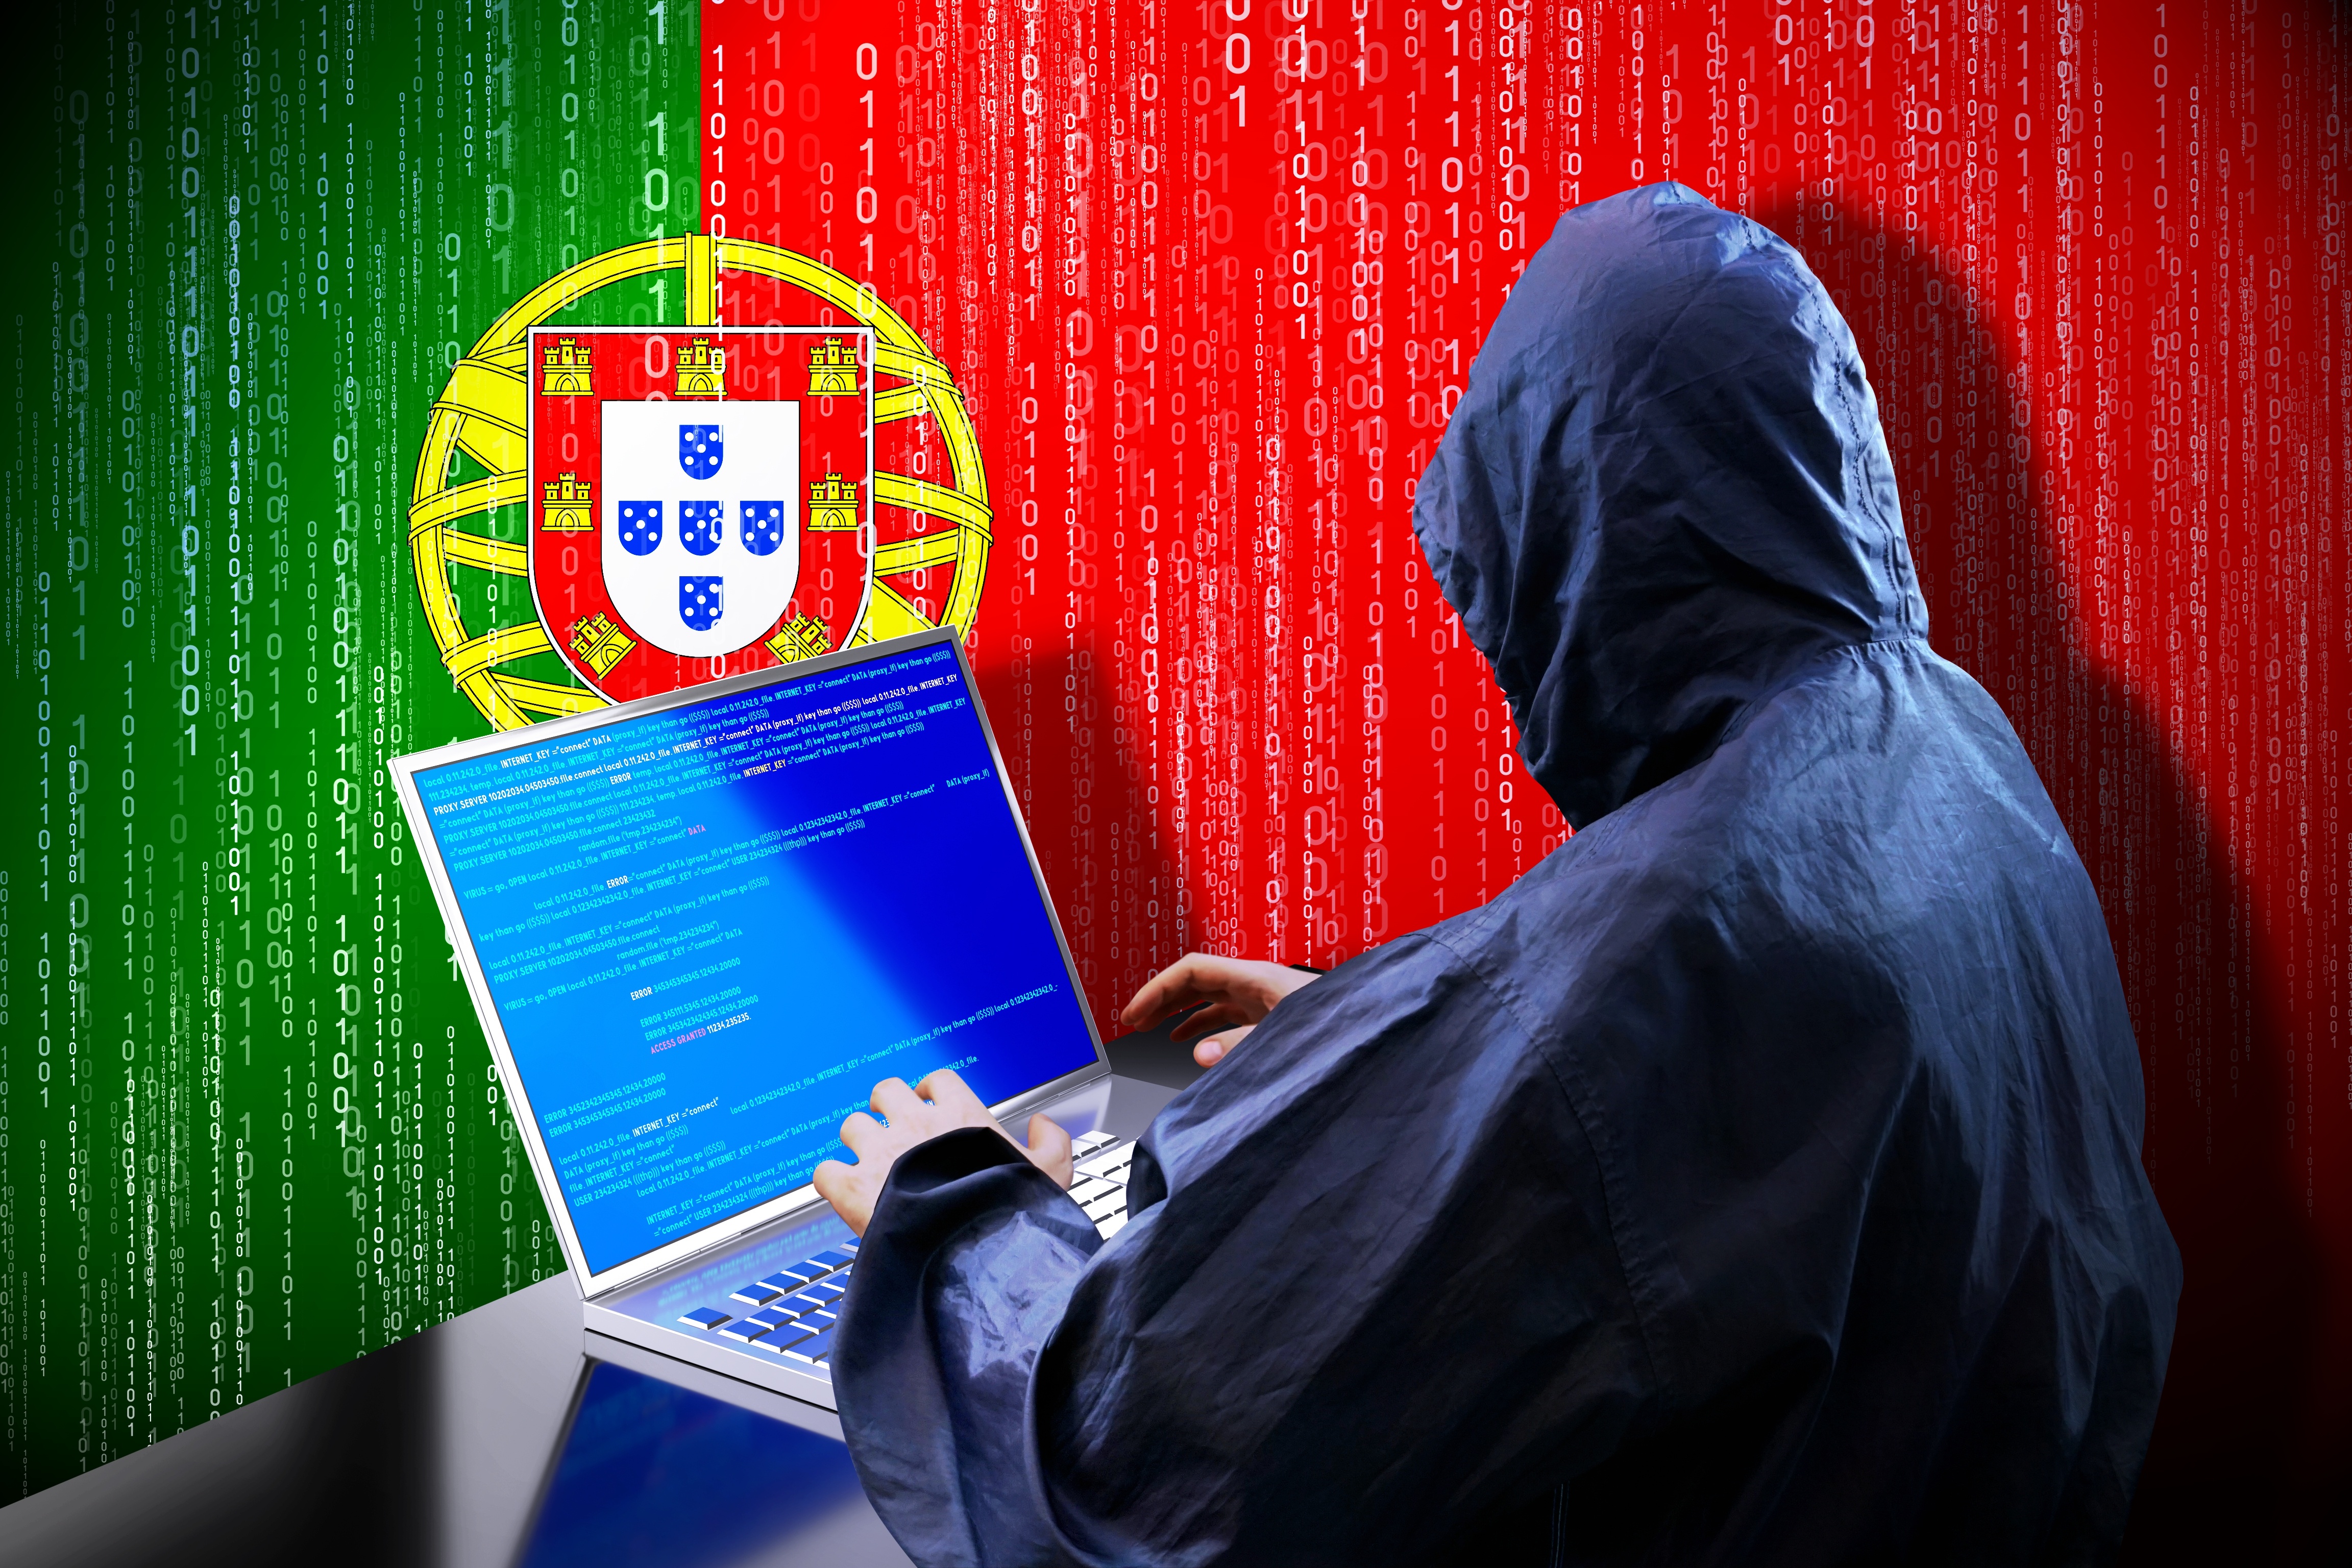 An image showing a hacker using a laptop PC against the backdrop of the Portuguese flag.